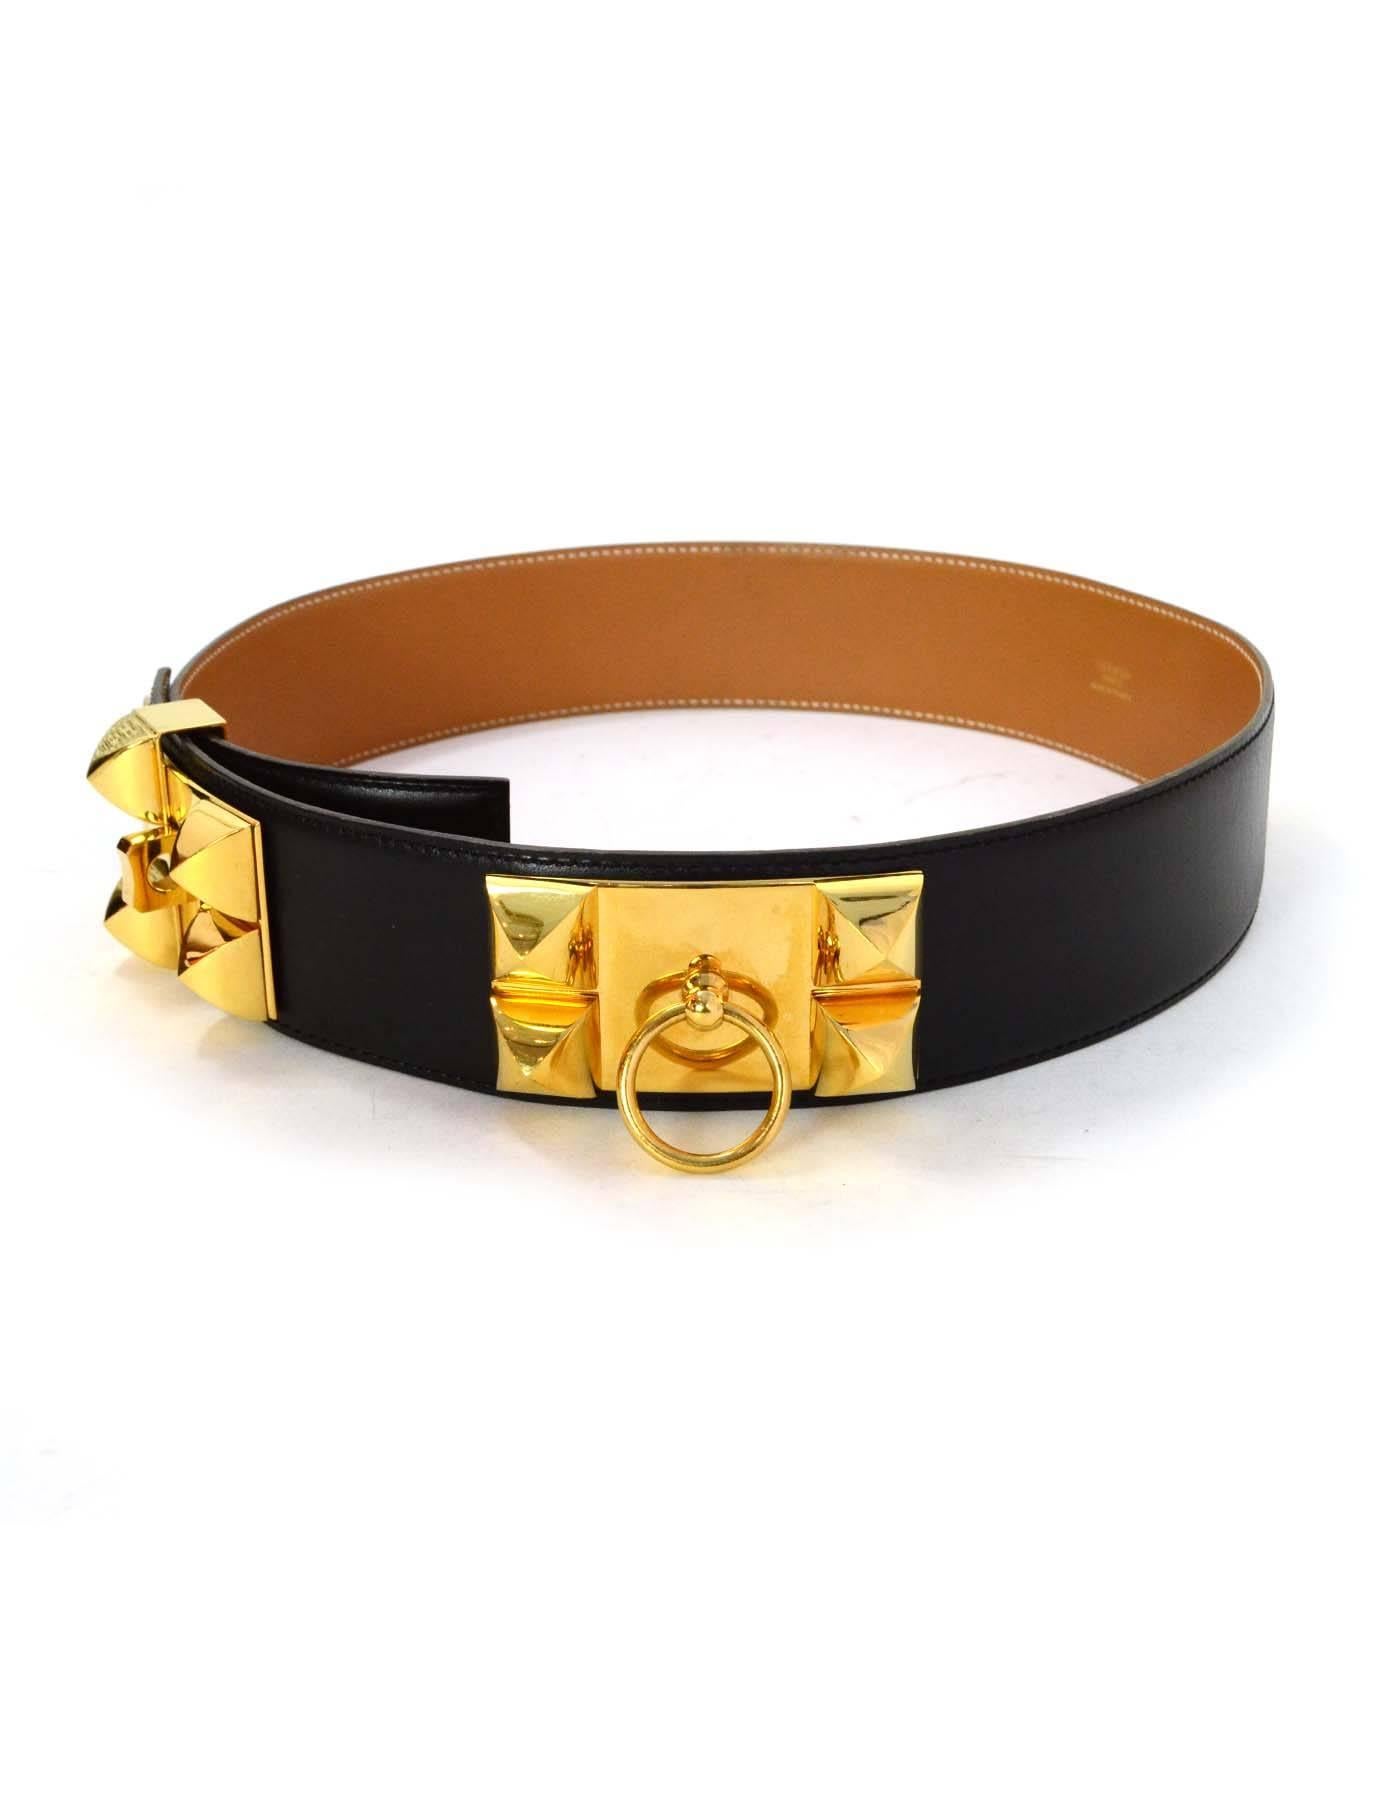 Hermes Vintage Black CDC Belt
Made in: France
Year of Production: 1992
Color: Black and gold
Hardware: Gold plated
Materials: Leather and metal
Opening/Closure: Adjustable slide lock with notches
Stamp: V stamp in circle
Retail Price: $2,350